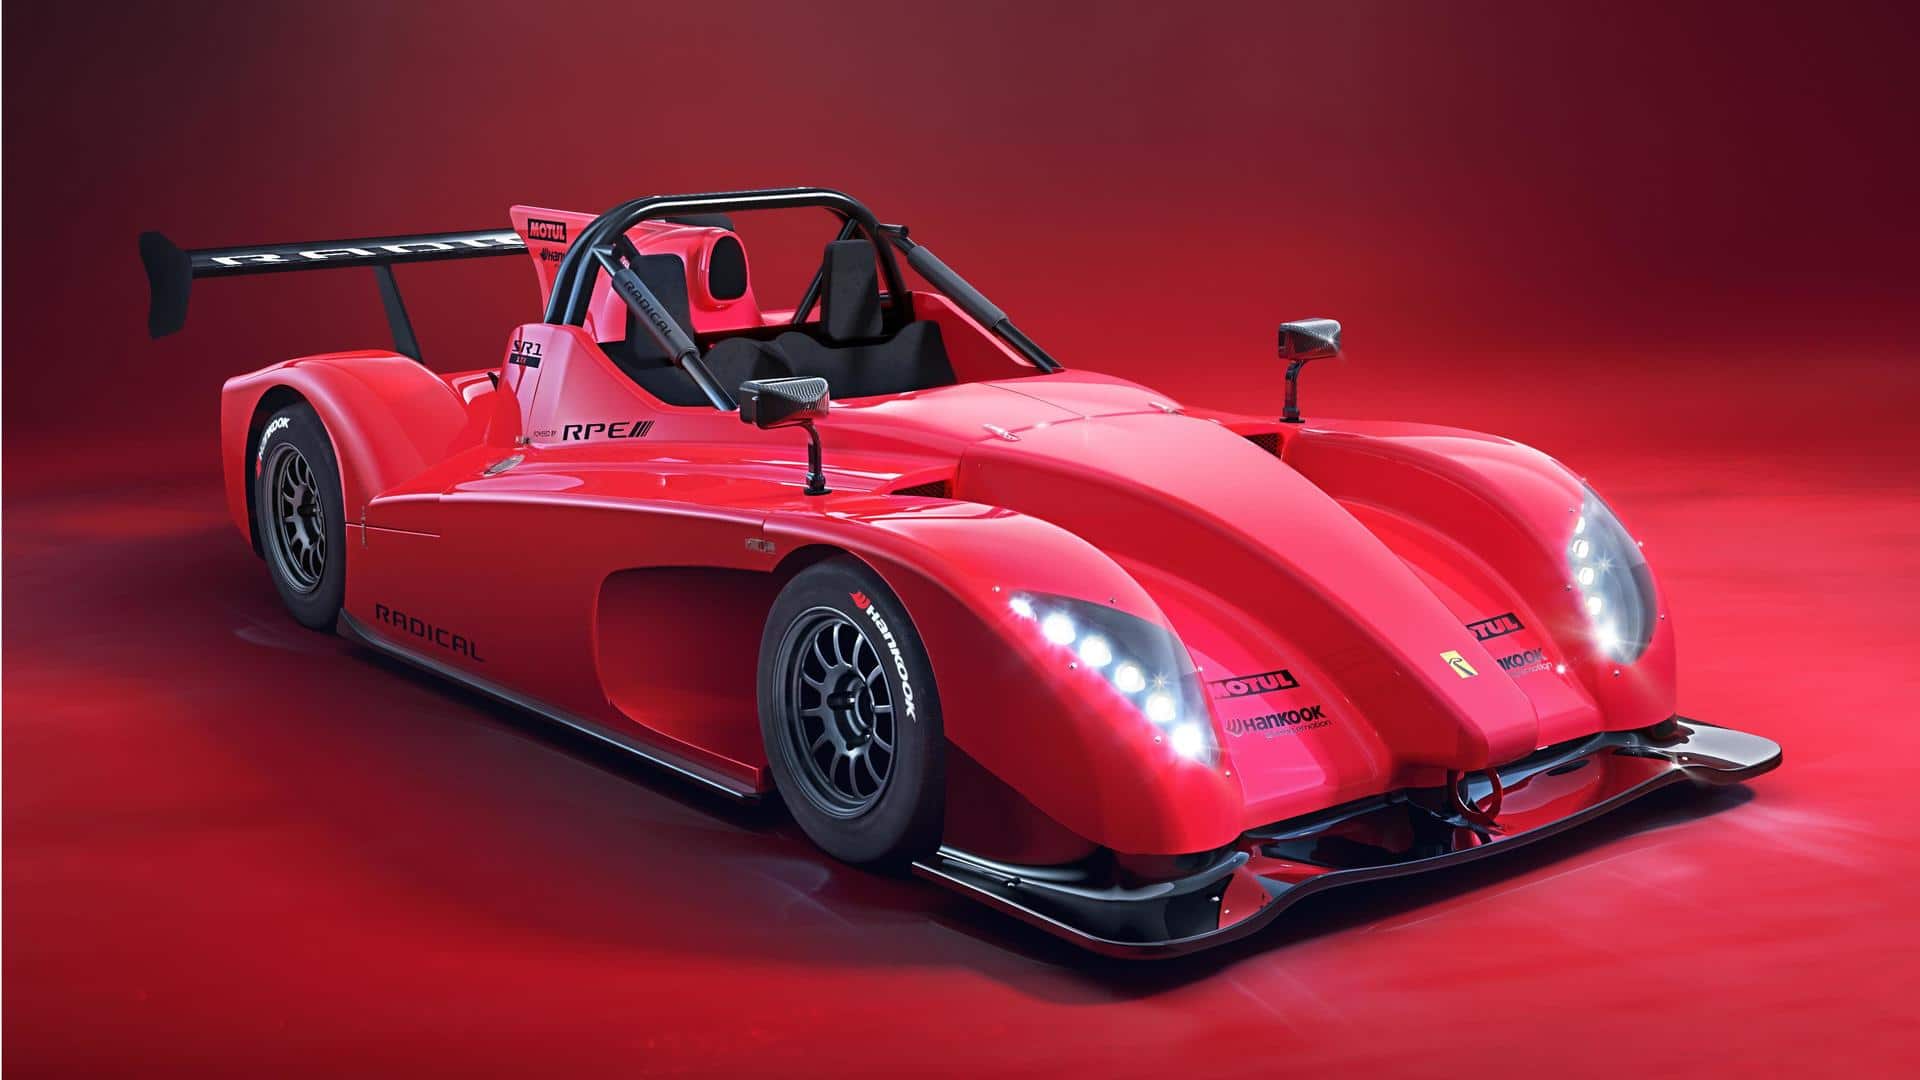 Top features of the Radical SR1 XXR race car